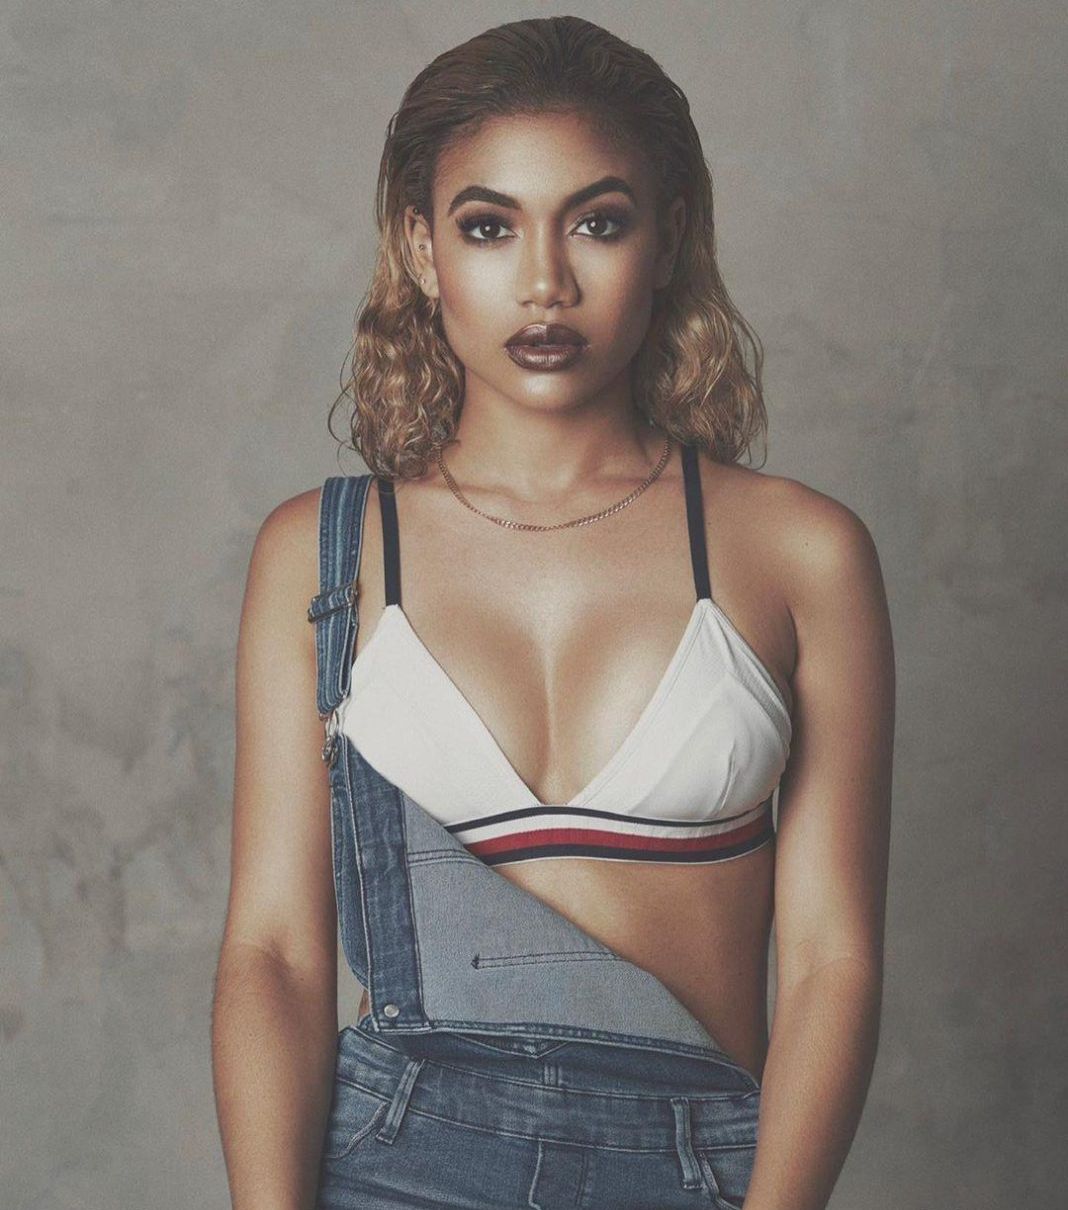 51 Paige Hurd Nude Pictures Which Makes Her An Enigmatic Glamor Quotient 253